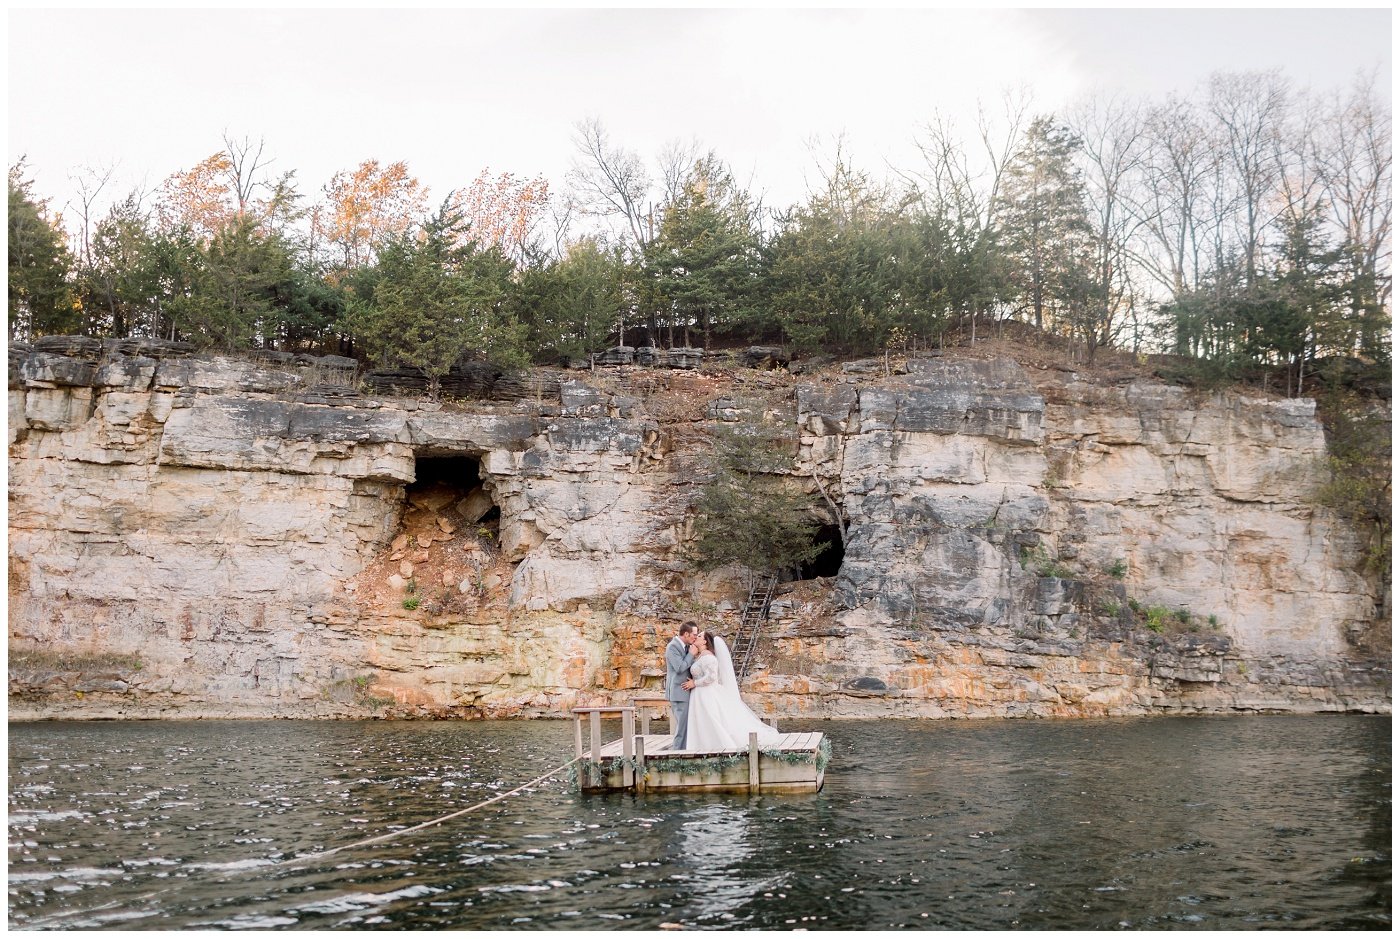 Wildcliff weddings and events